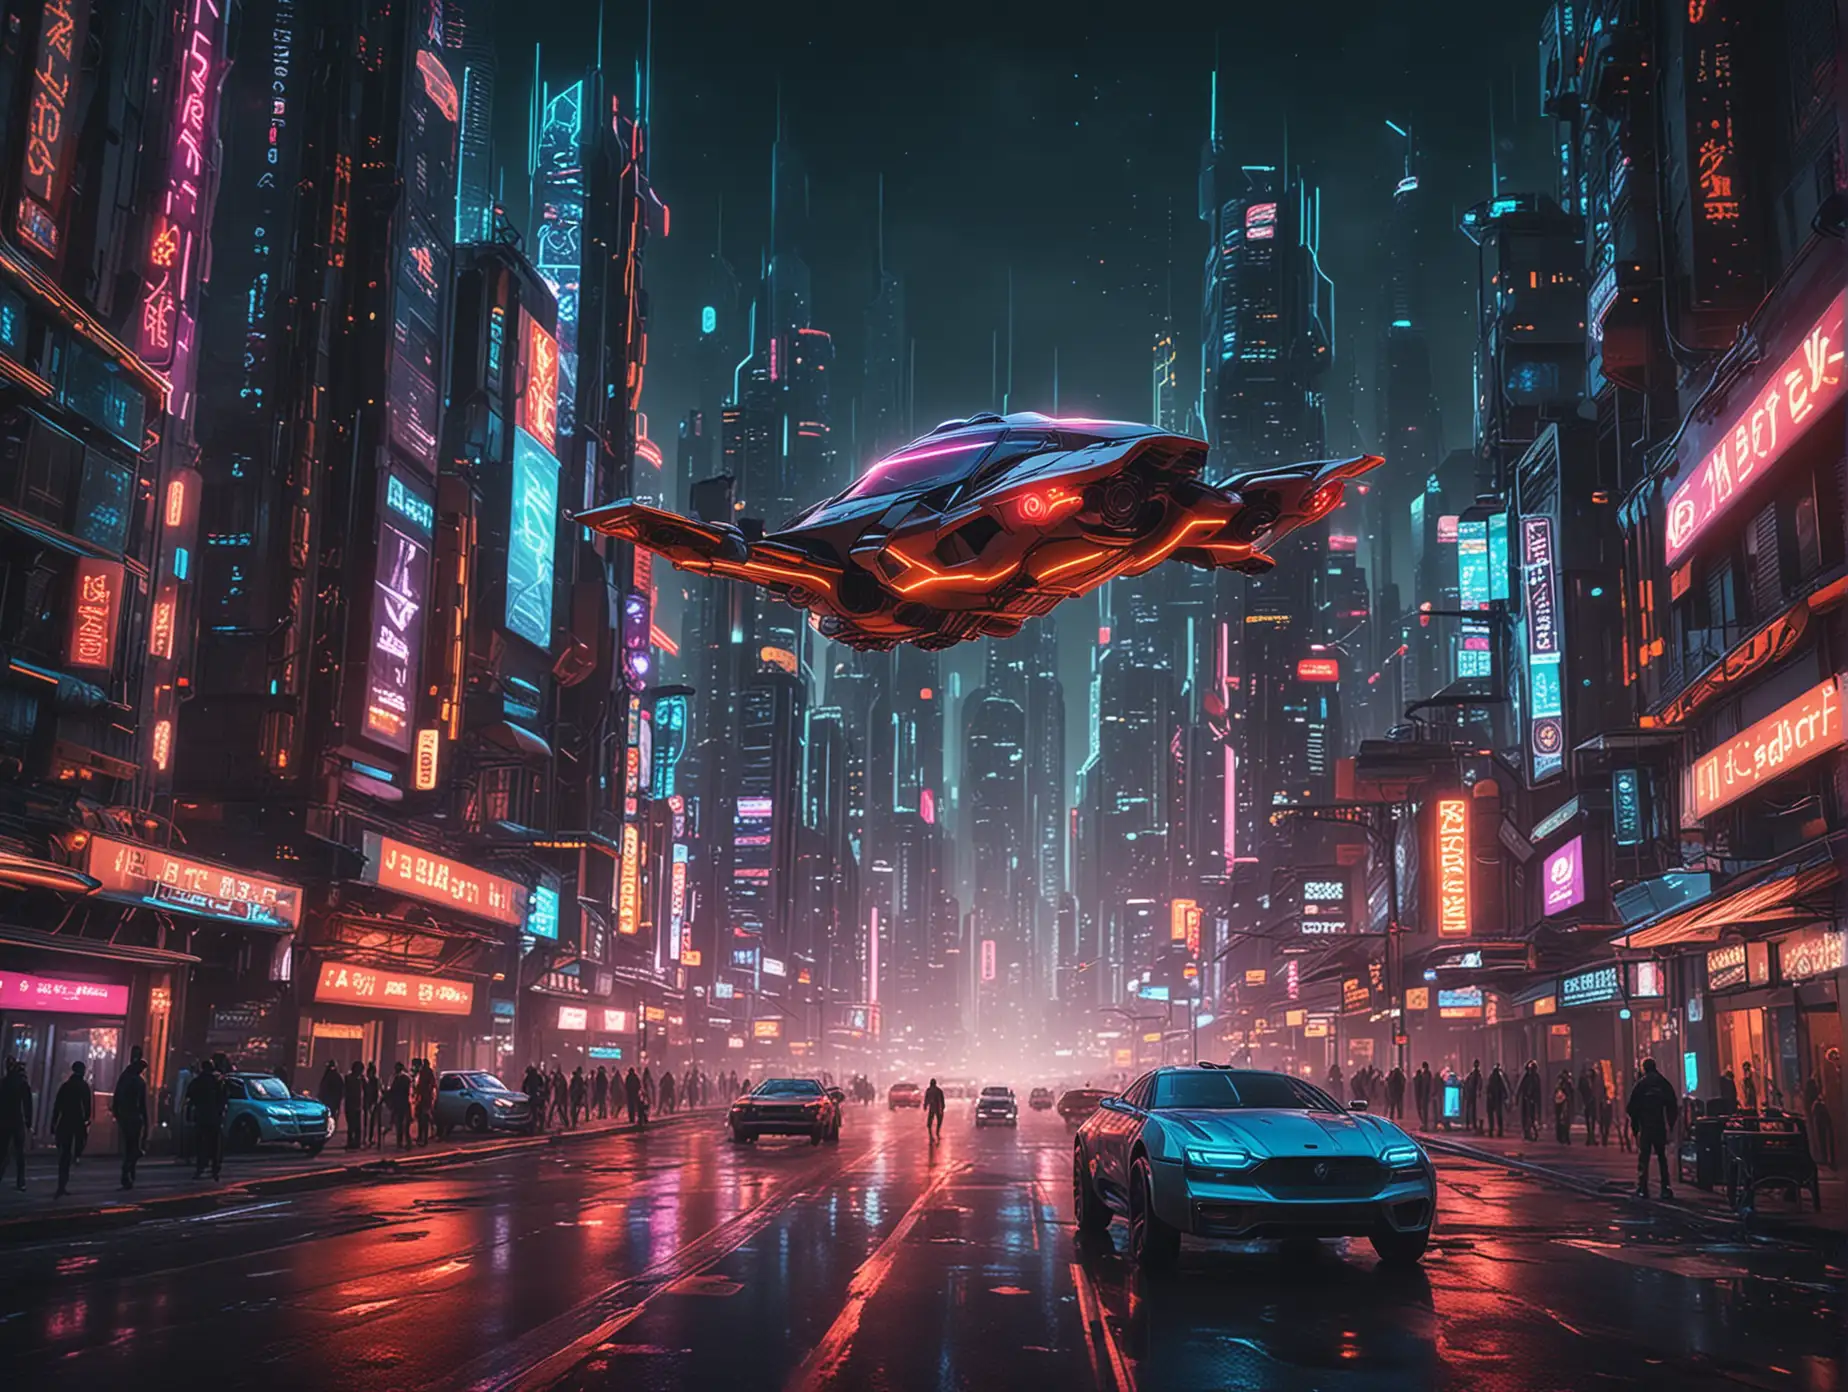 Theme: Sci-fi city, Style: Futuristic, Scene: High-tech city, flying cars, skyscrapers, Characters: Robots, Future humans, Actions: Walking, Flying, Color scheme: Neon lights, cool colors, Time: Night, Visual effects: Light tracking, Dynamic blur, Music: Electronic music